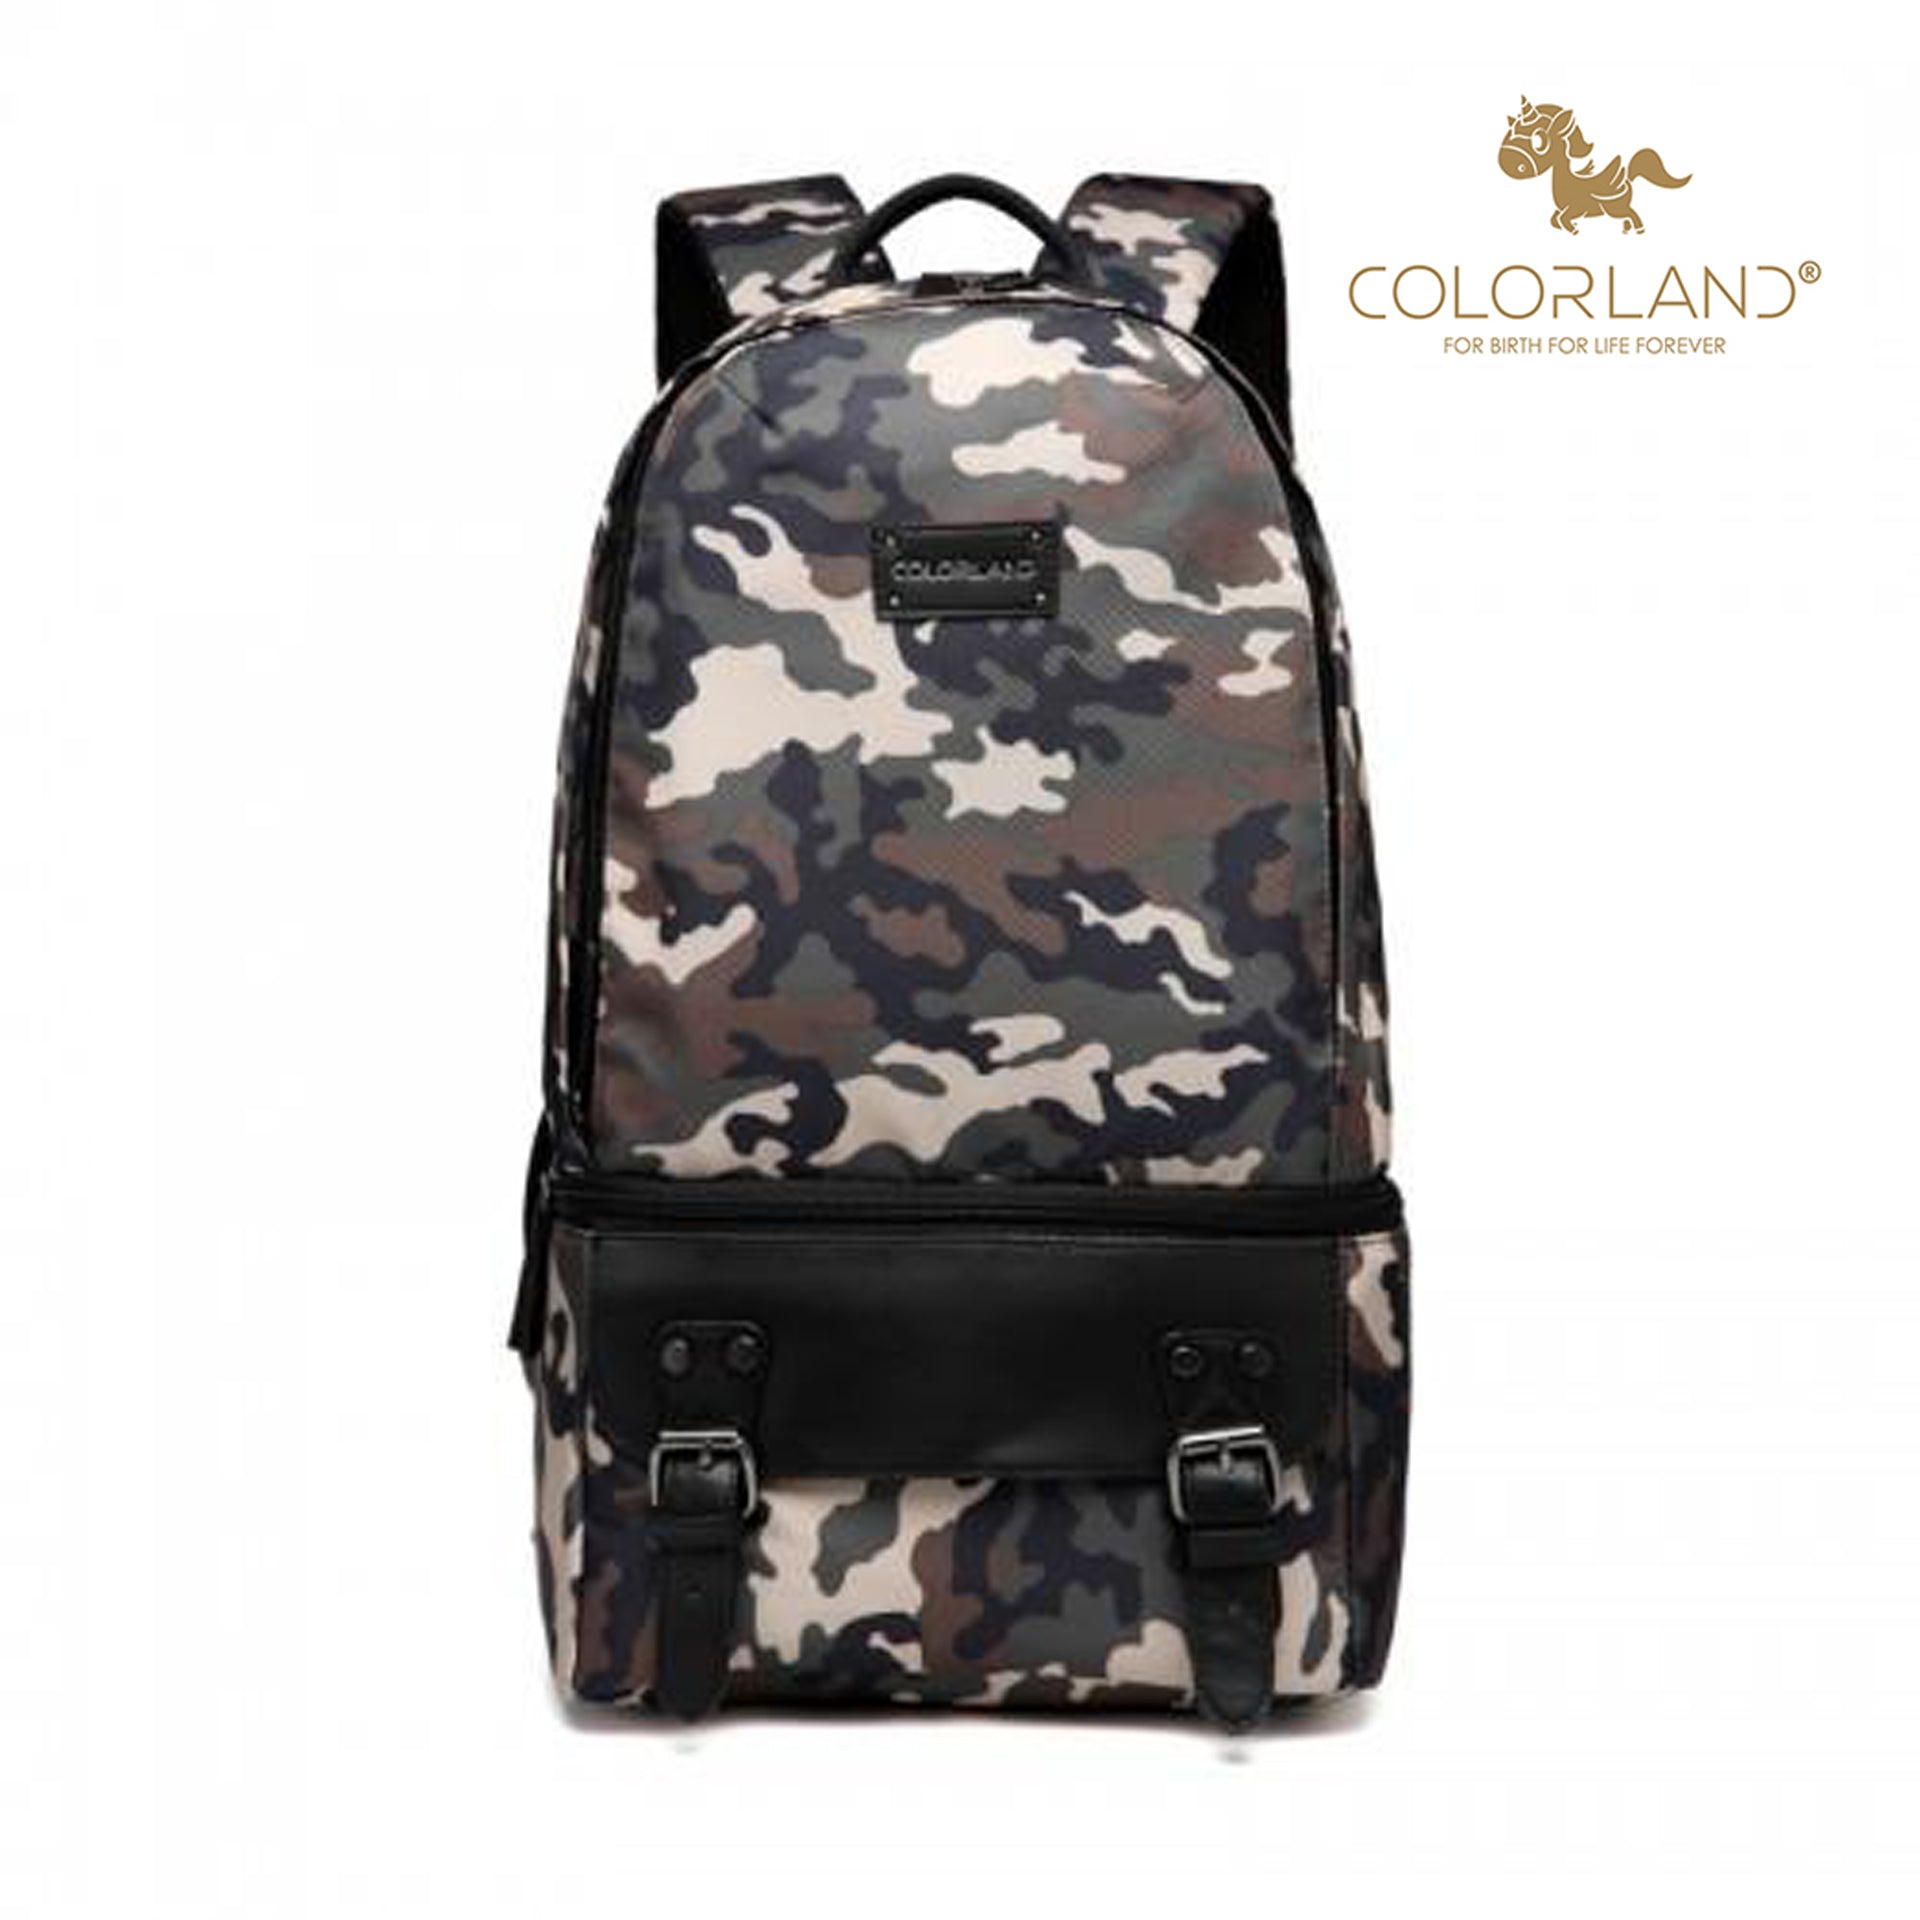 Colorland Diaper Backpack with Cooler 50% OFF (BP126-B/ Camouflage)